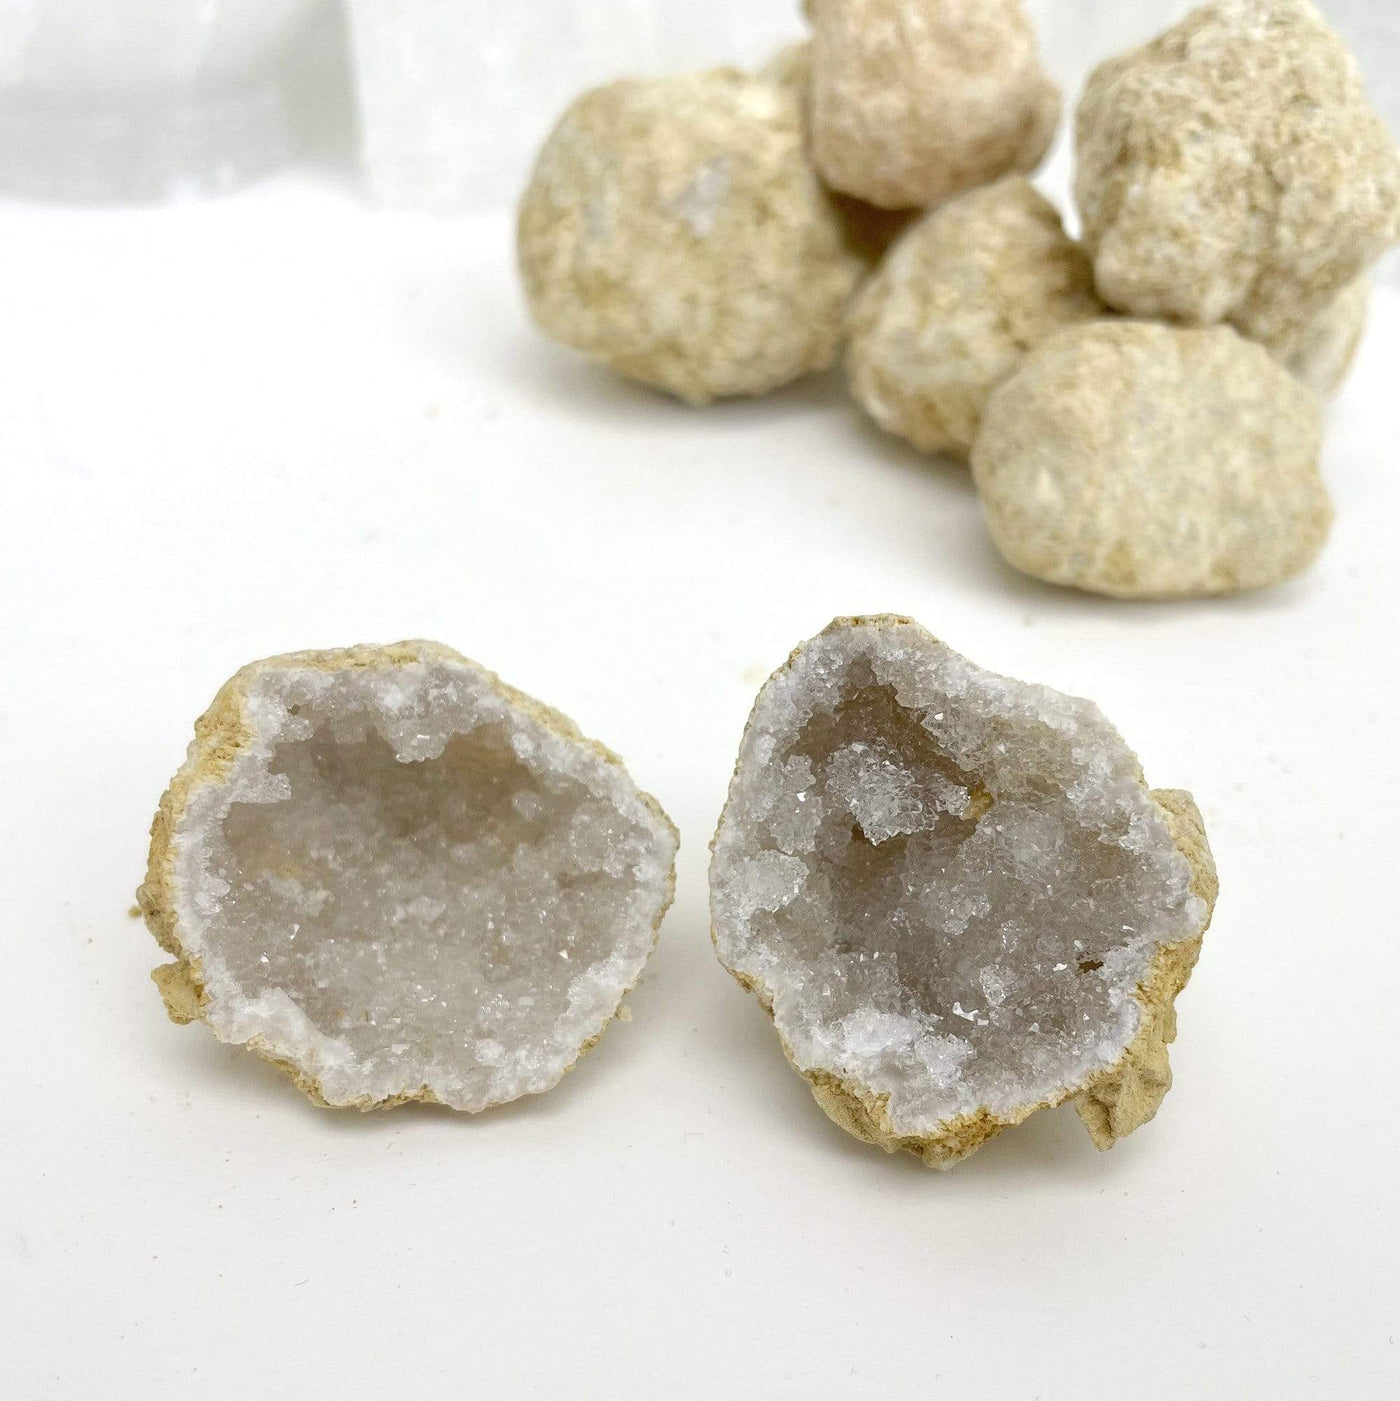 Single Break Your Own Geodes - White Color Geode opened up with bundle of geodes closed up in the back close up